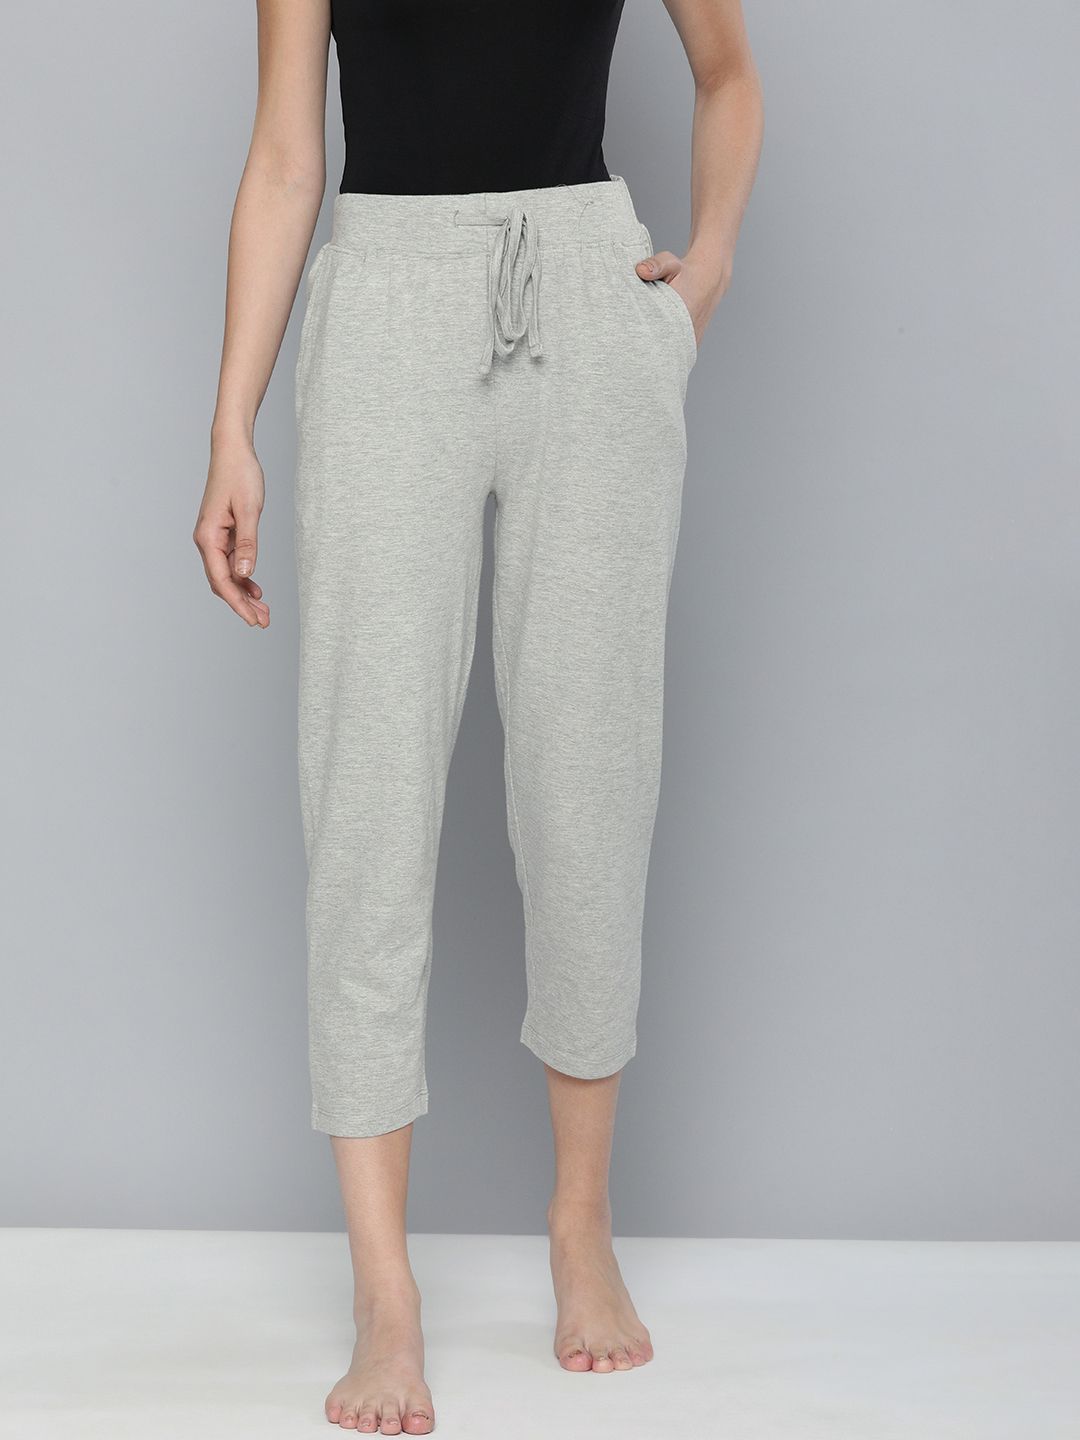 HERE&NOW Woman's Grey Melange Solid Lounge Pants Price in India